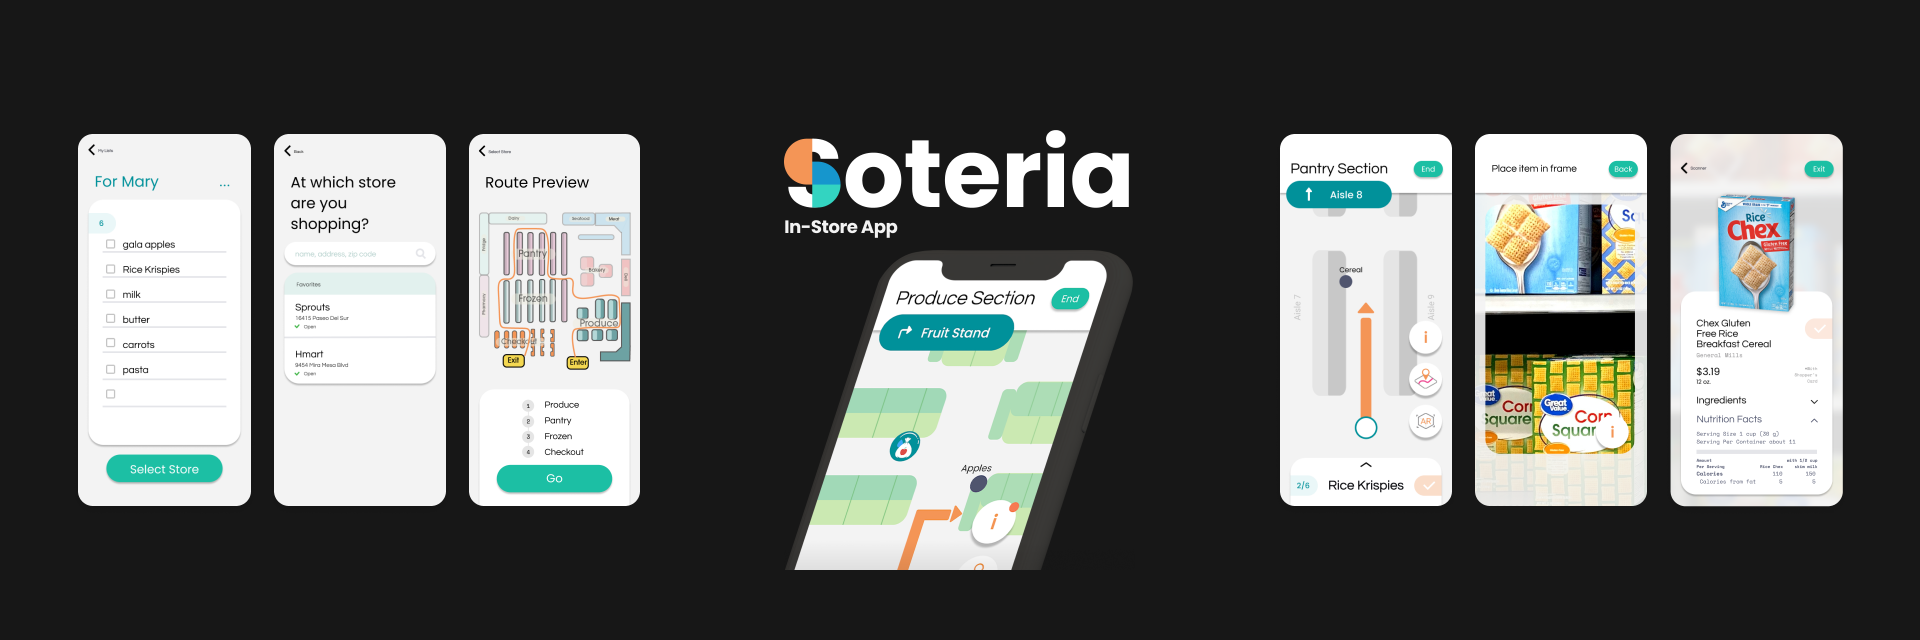 A layout of the Soteria UI